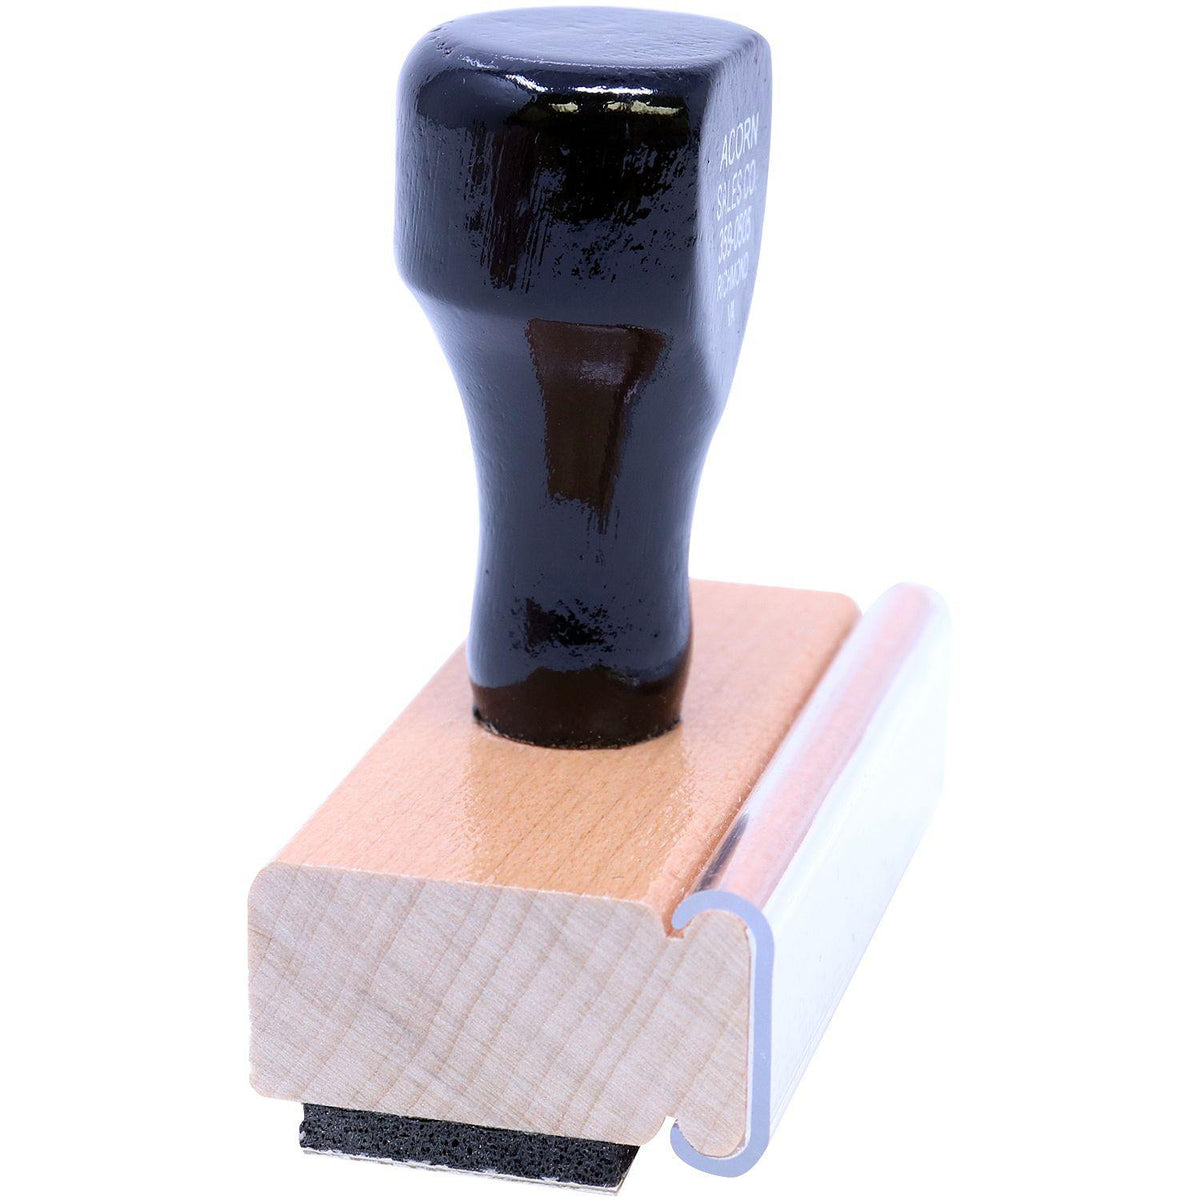 Side View of Large Distributed Rubber Stamp at an Angle